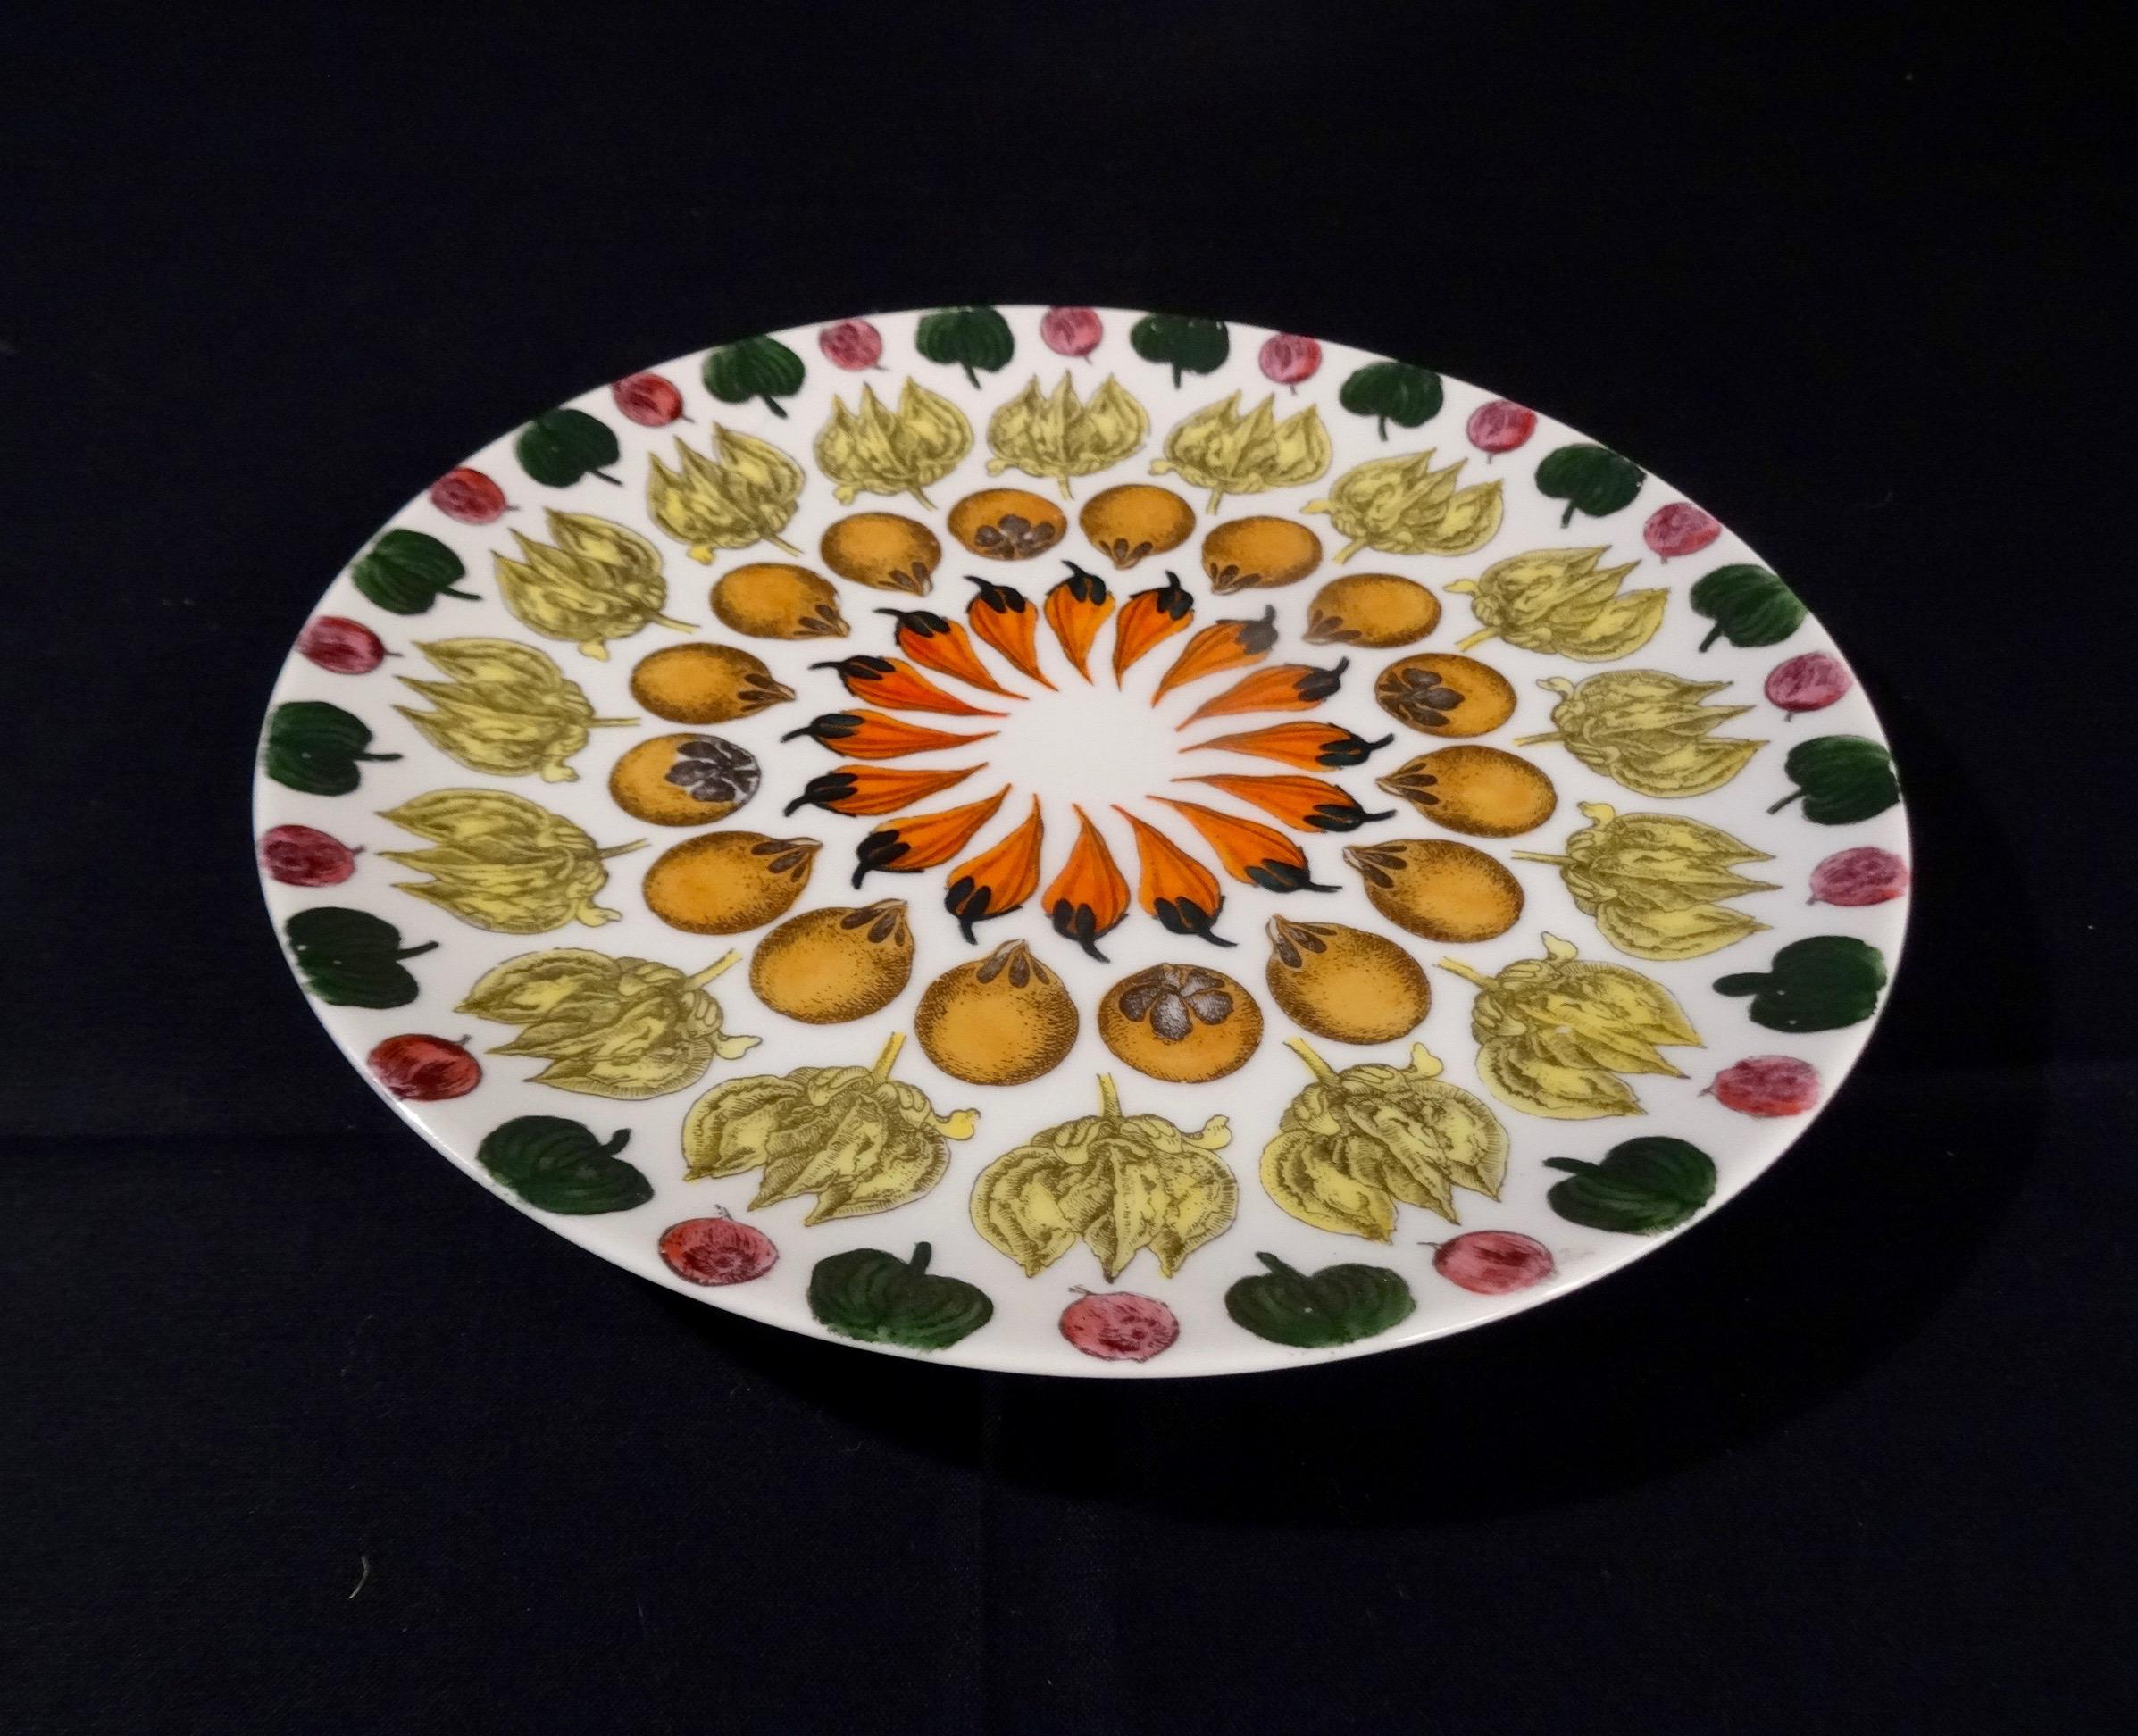 Giostra di Frutta (Carousel of fruit) plate designed in the early 1950s by Piero Fornasetti in Italy. Plate no 2. It is in very good vintage condition.